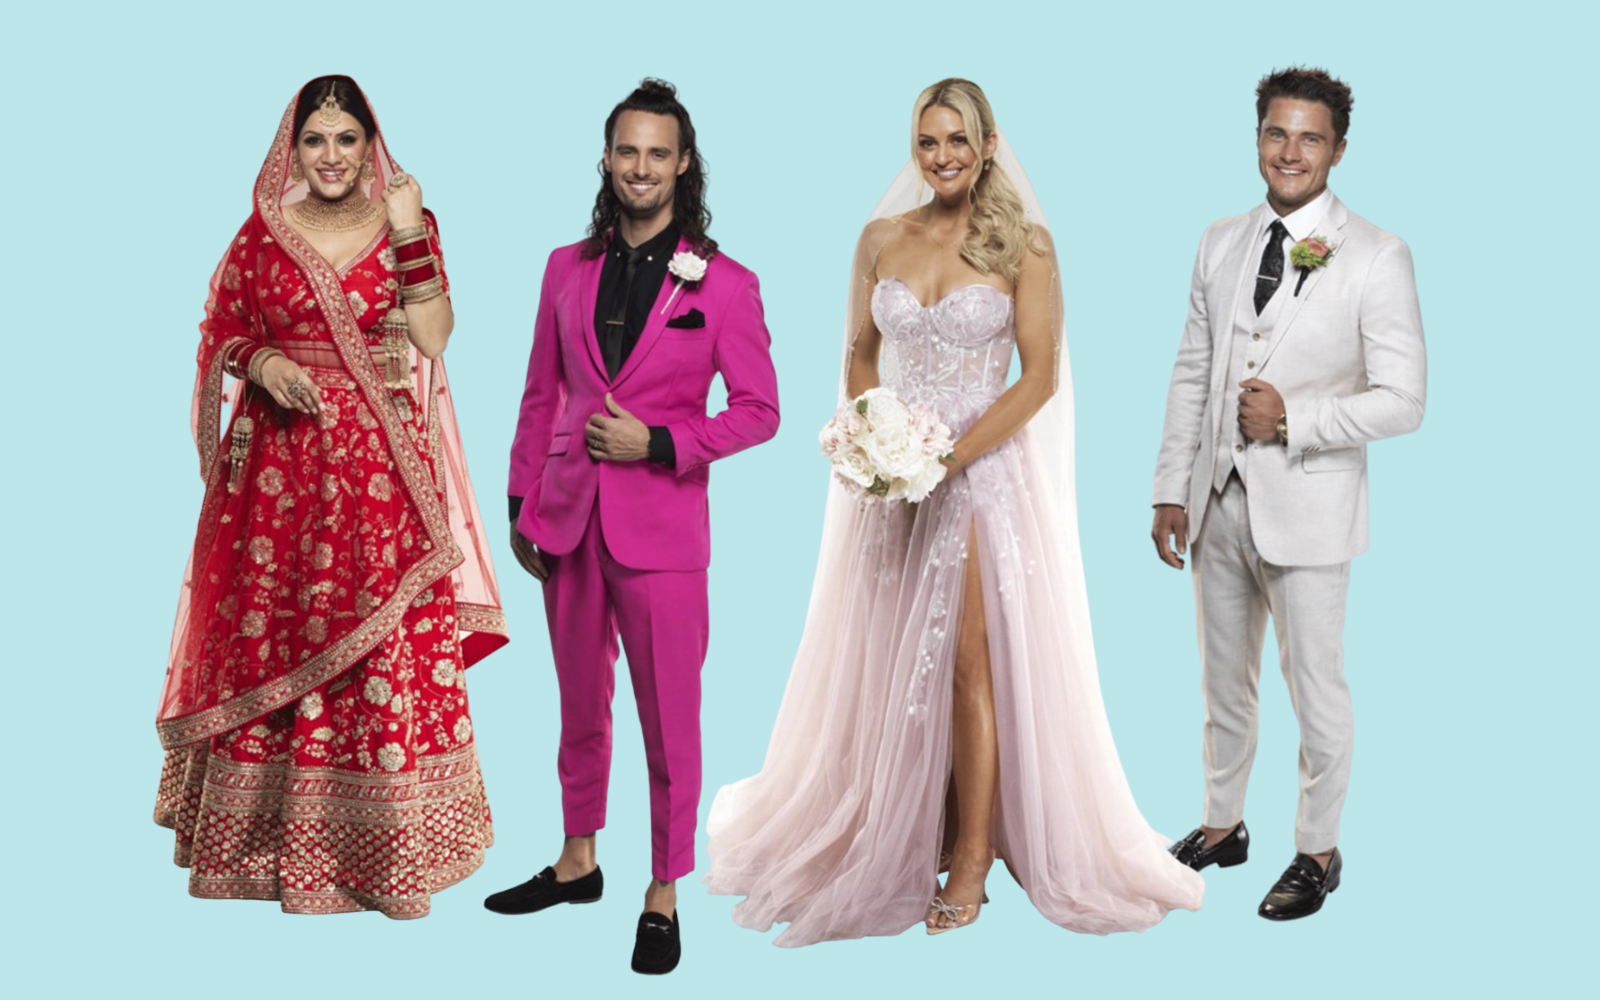 MAFS 2023: Meet the brides and grooms about to walk down the aisle